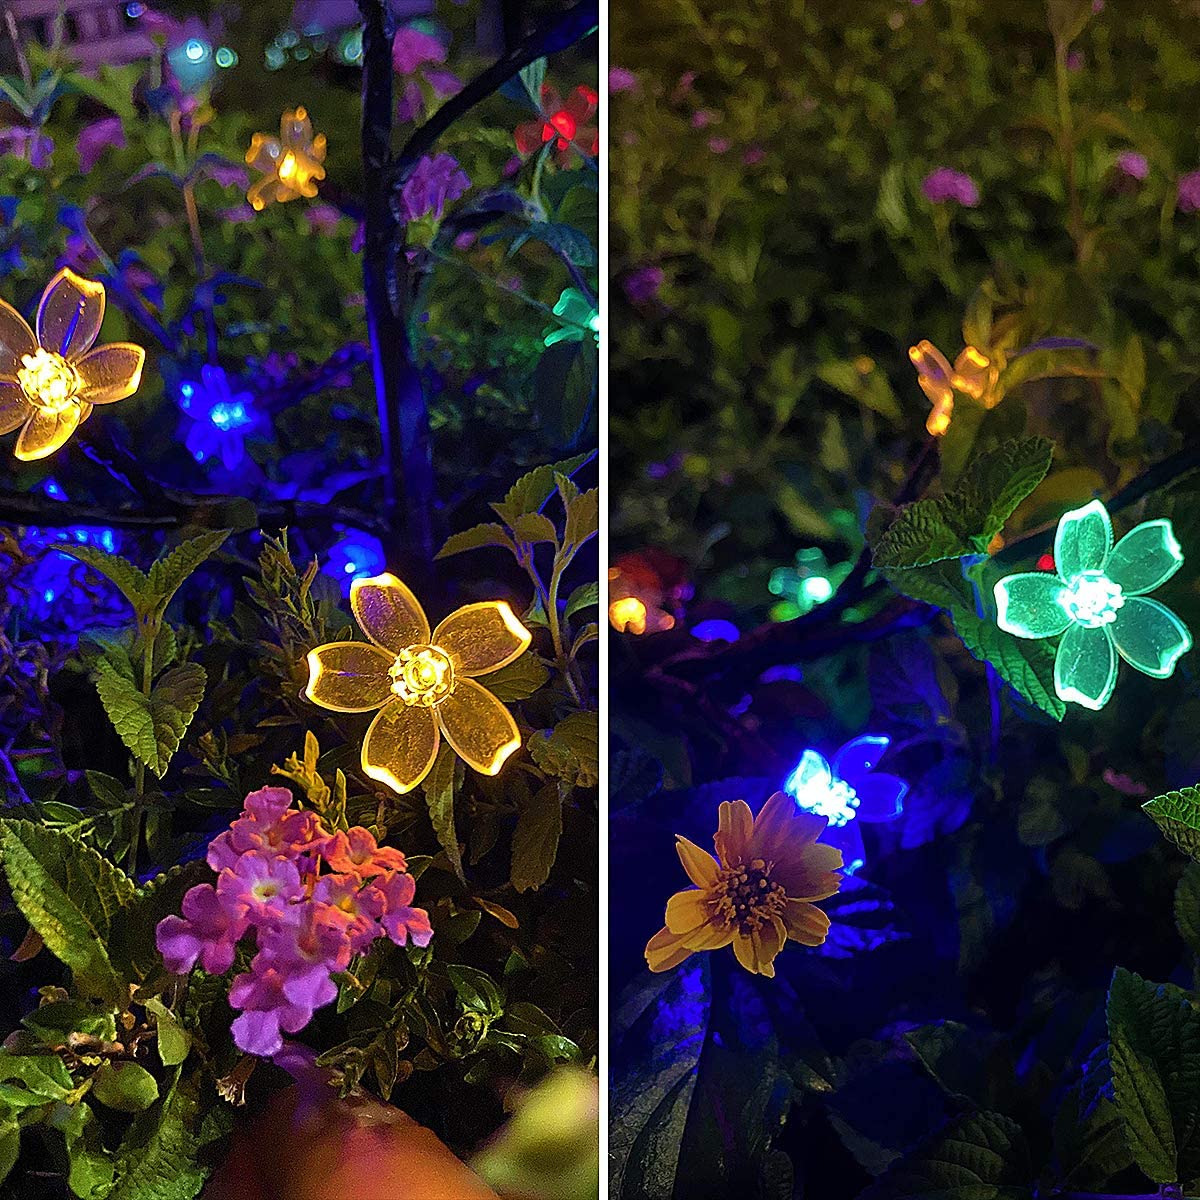 Solar Flower Lights with 20 Cherry Blossom,Outdoor Solar Lights, 2 Pack Solar Fairy Lights Waterproof Multi-Color Solar Powered Garden Lights, Bigger Solar Panel for Pathway Patio Yard Christmas Decor - image 2 of 8